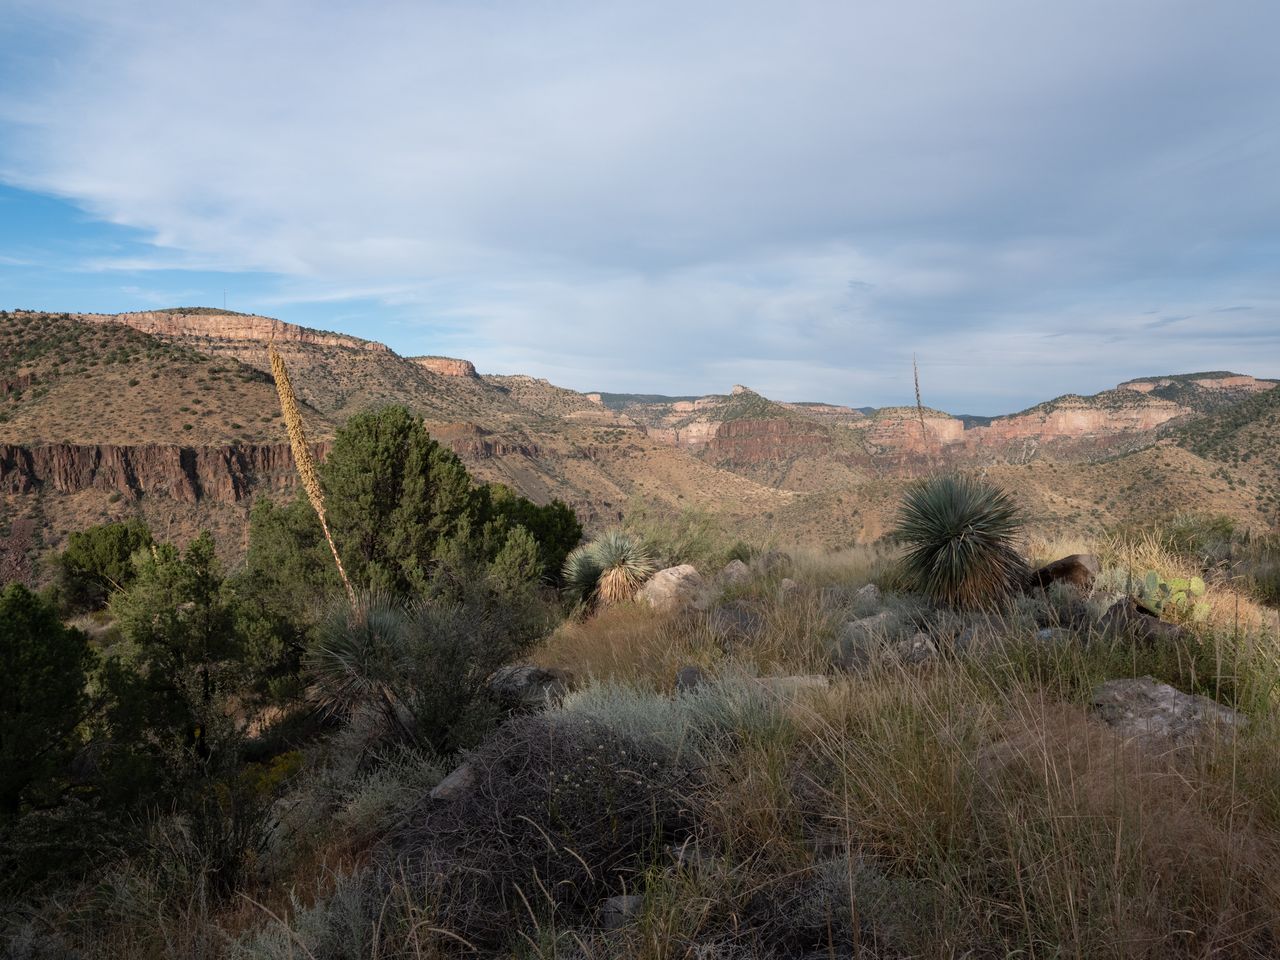 Looking out over the Salt River Canyon on the White Mountain Apache Reservation.